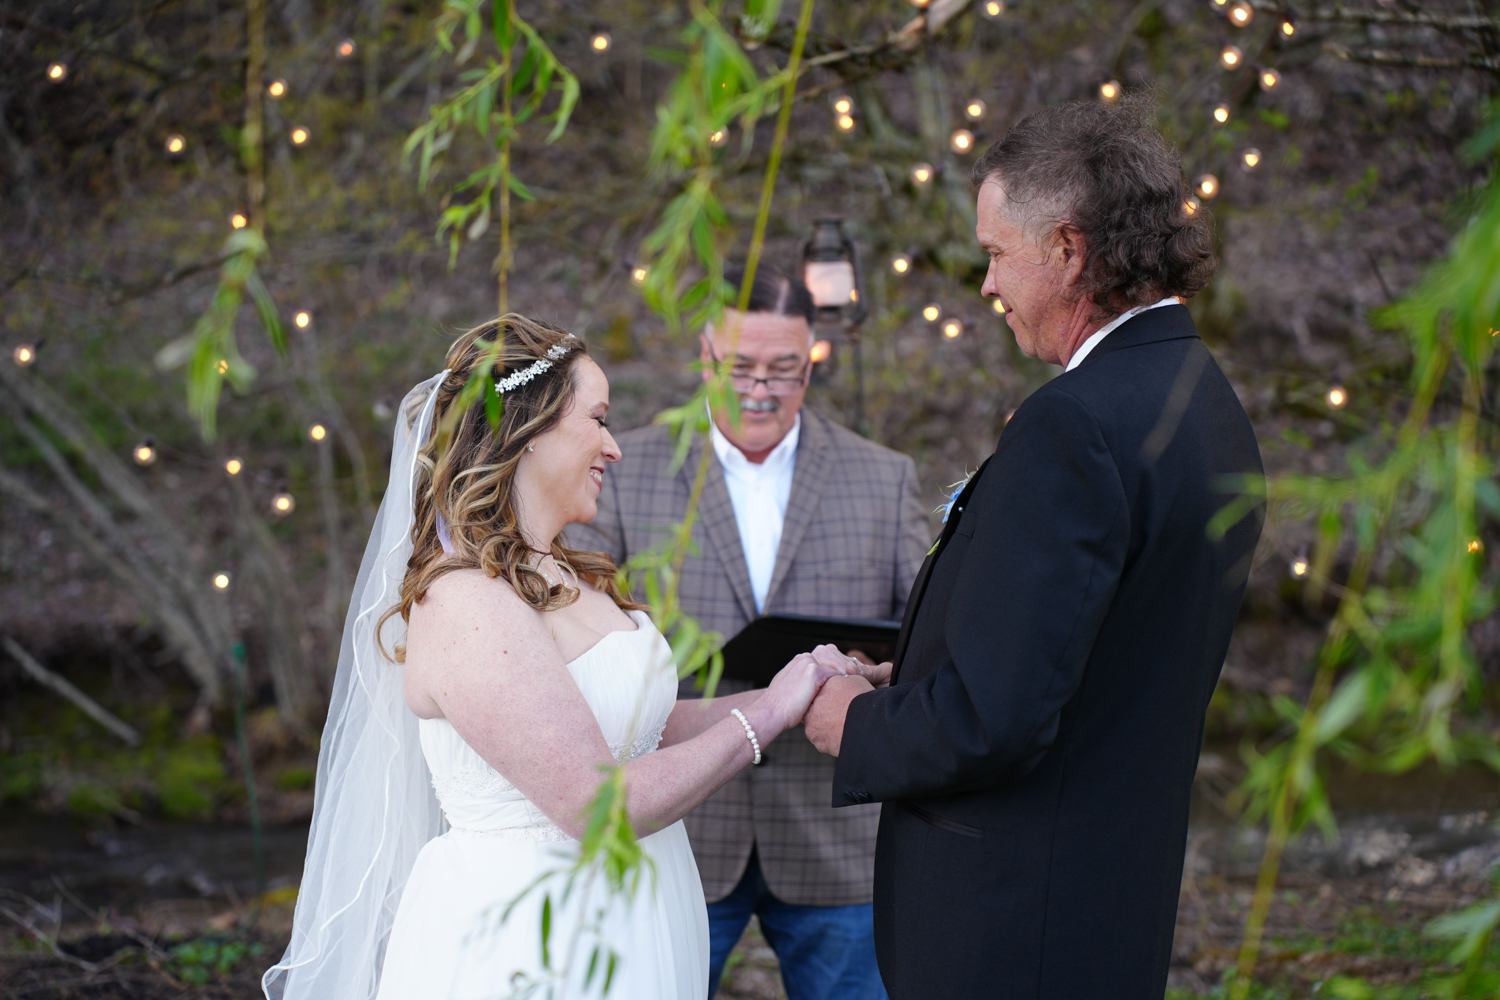 Micro Wedding for Two under a willow tree in the early spring